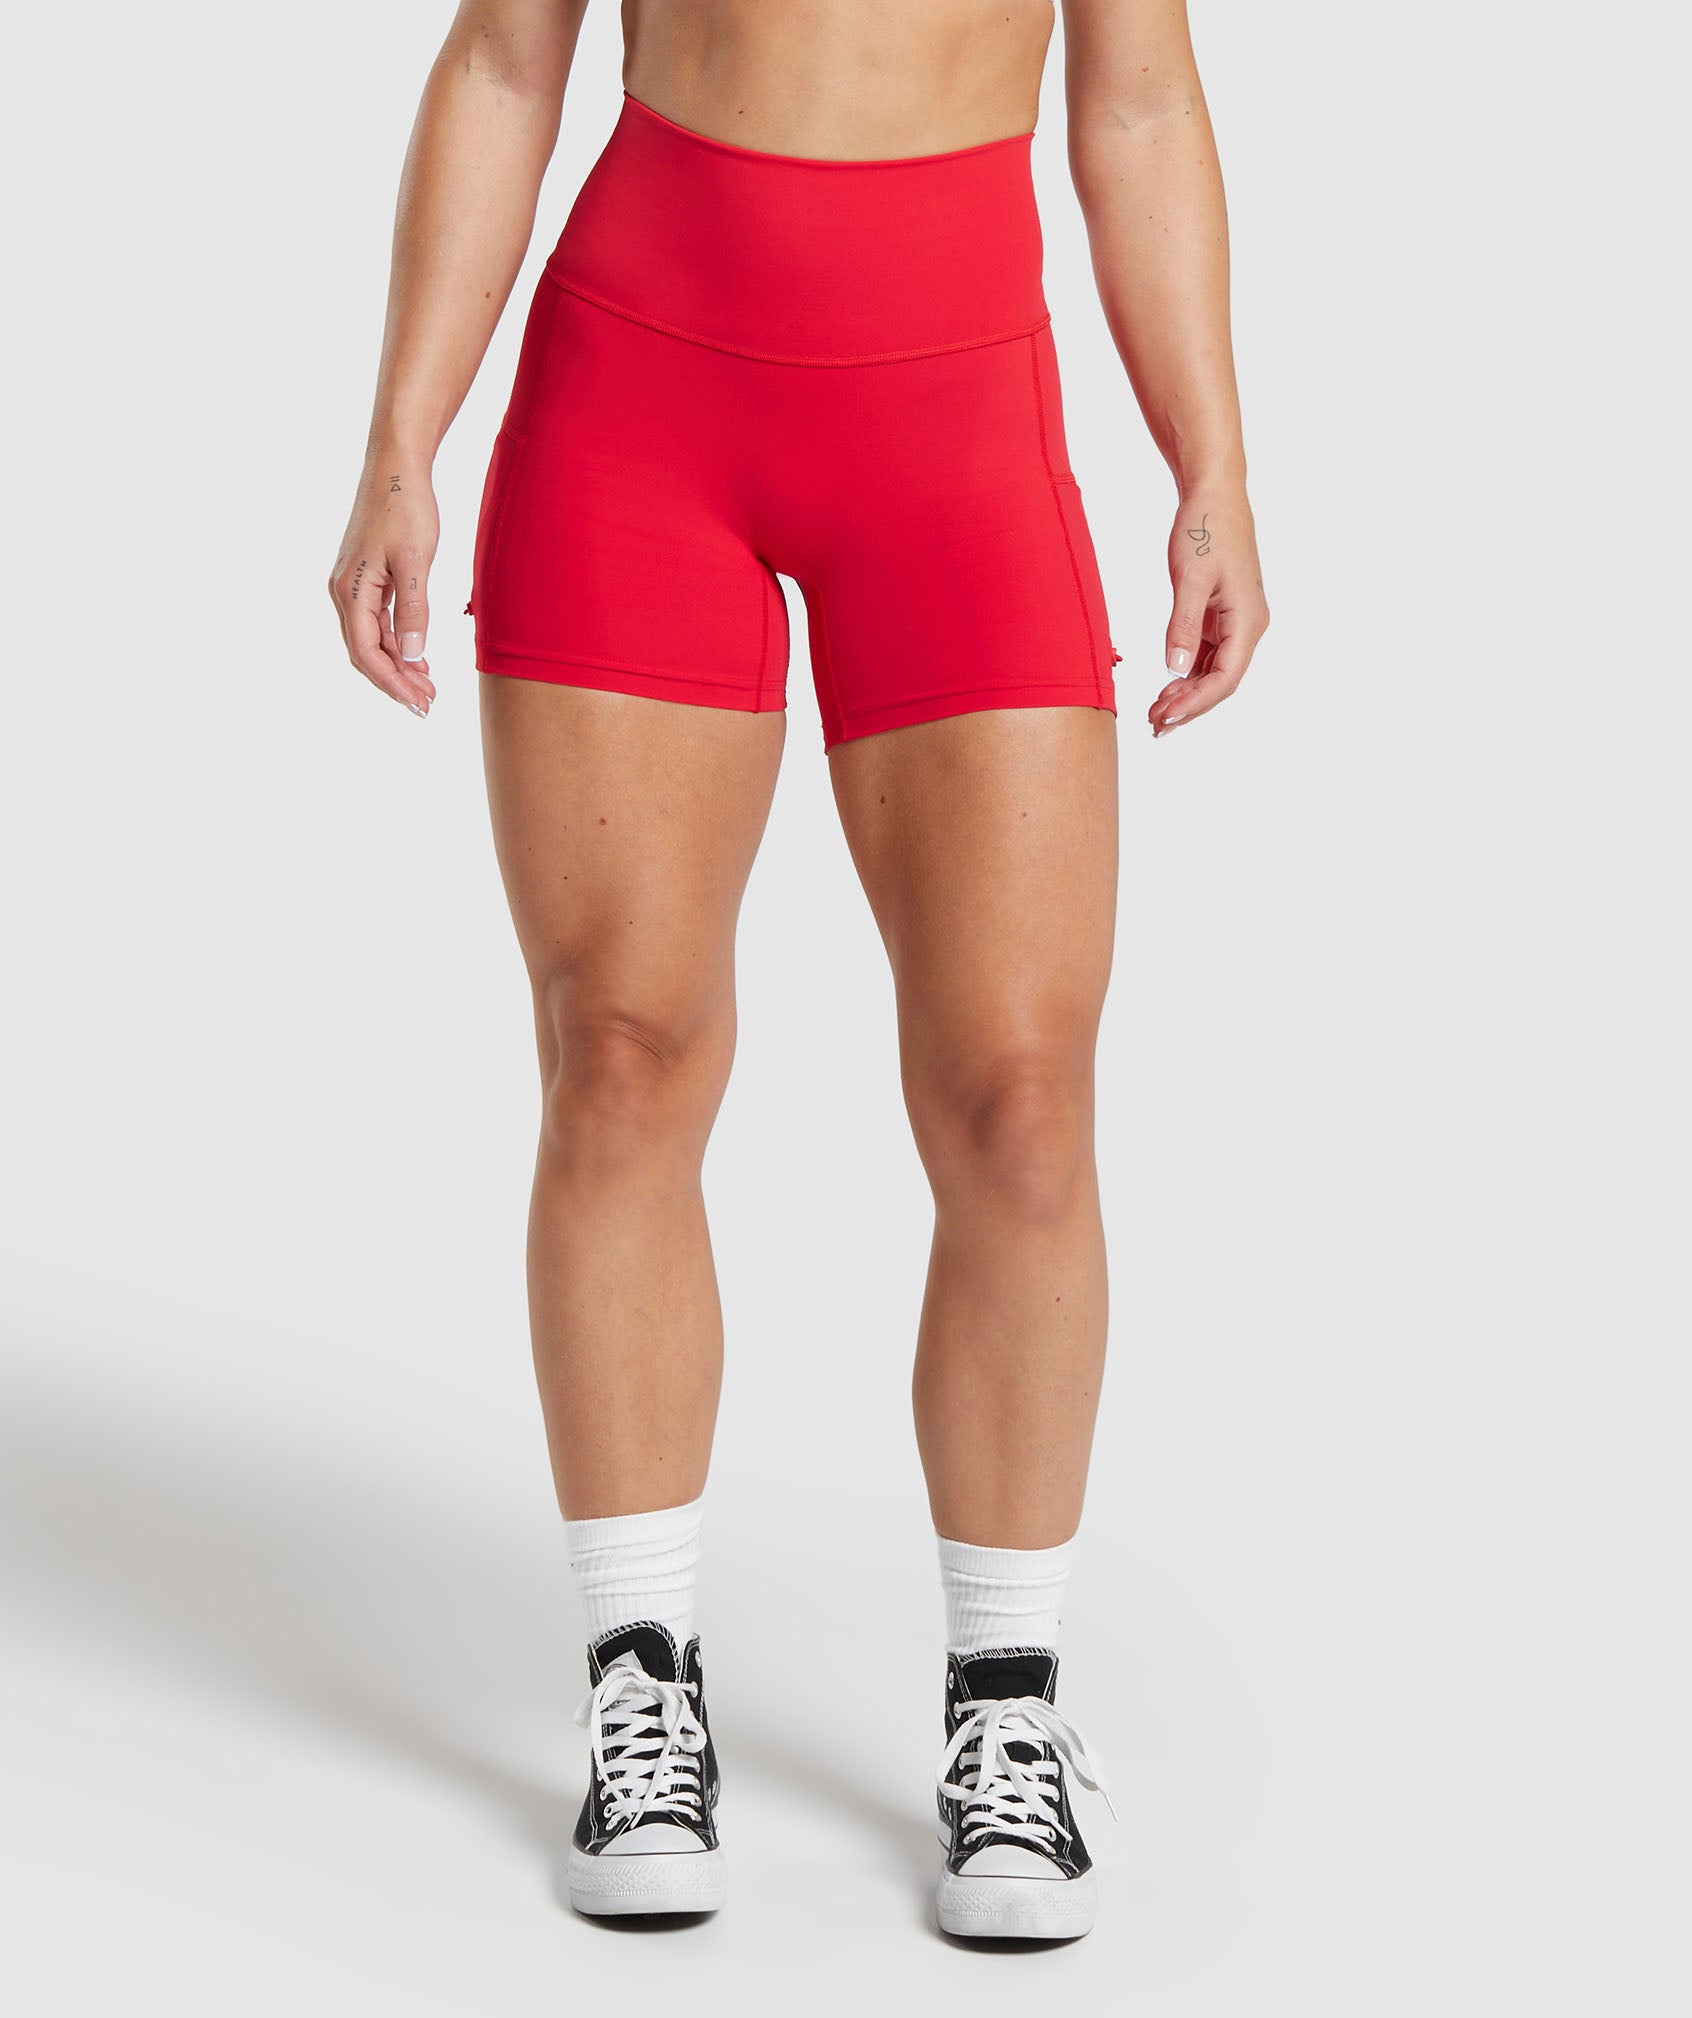 Legacy Tight Shorts in Jamz Red is out of stock